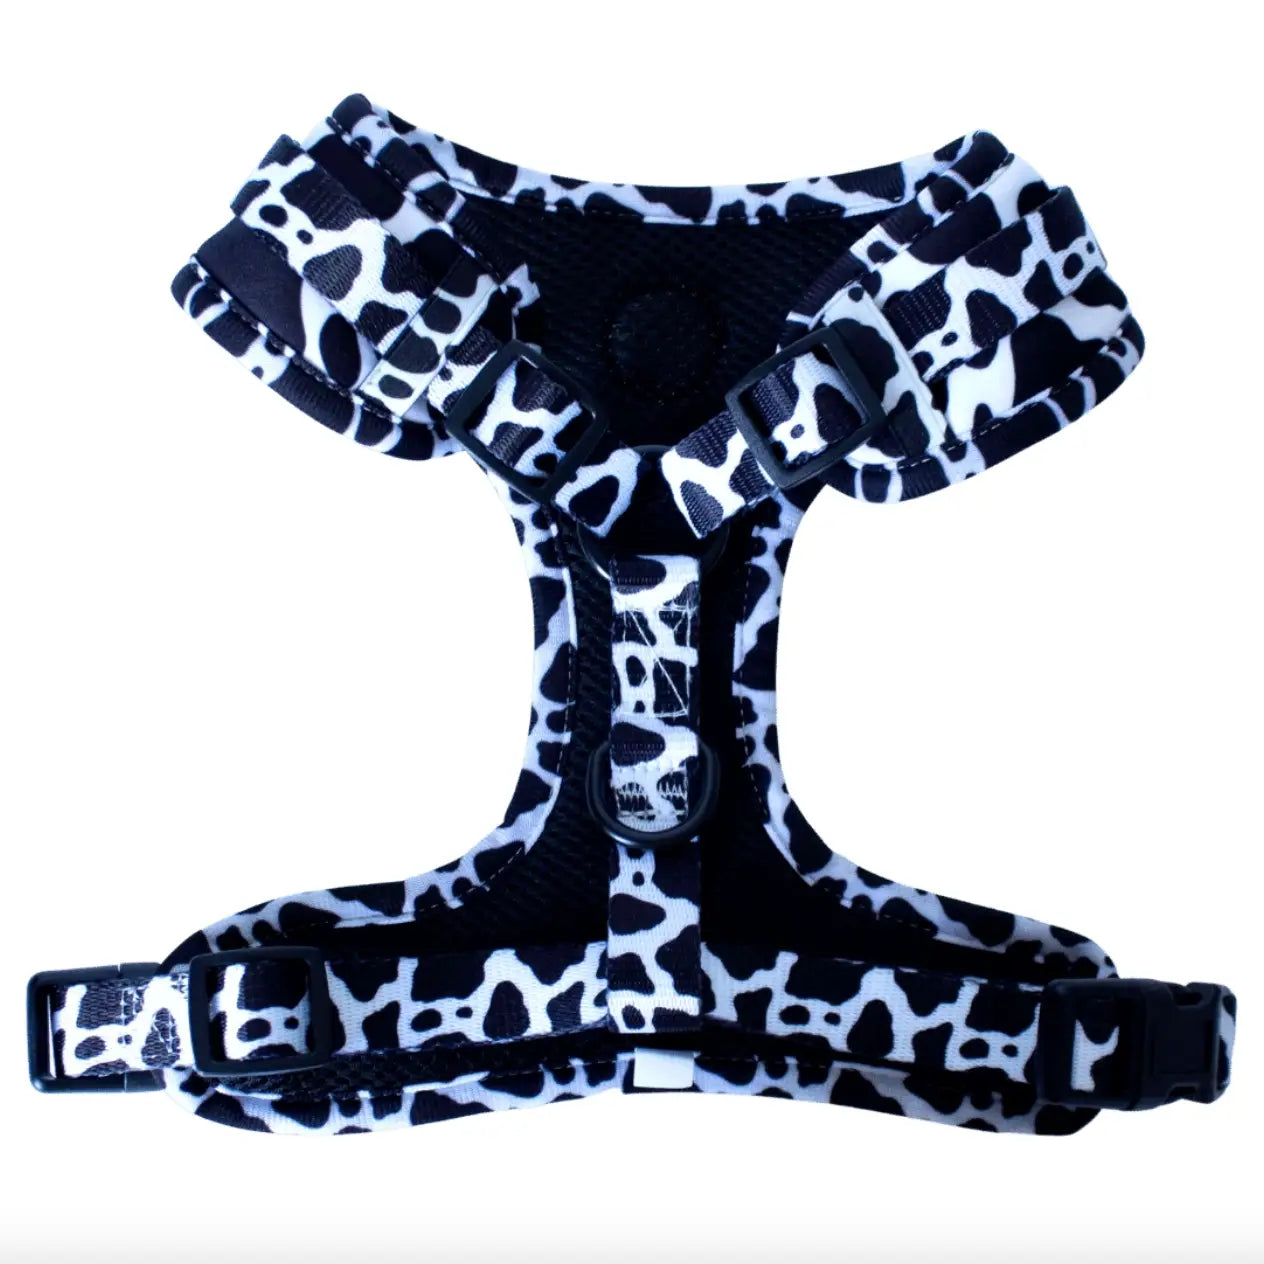 Isolated Cow Print dog harness with black mesh on the inside and black hardware